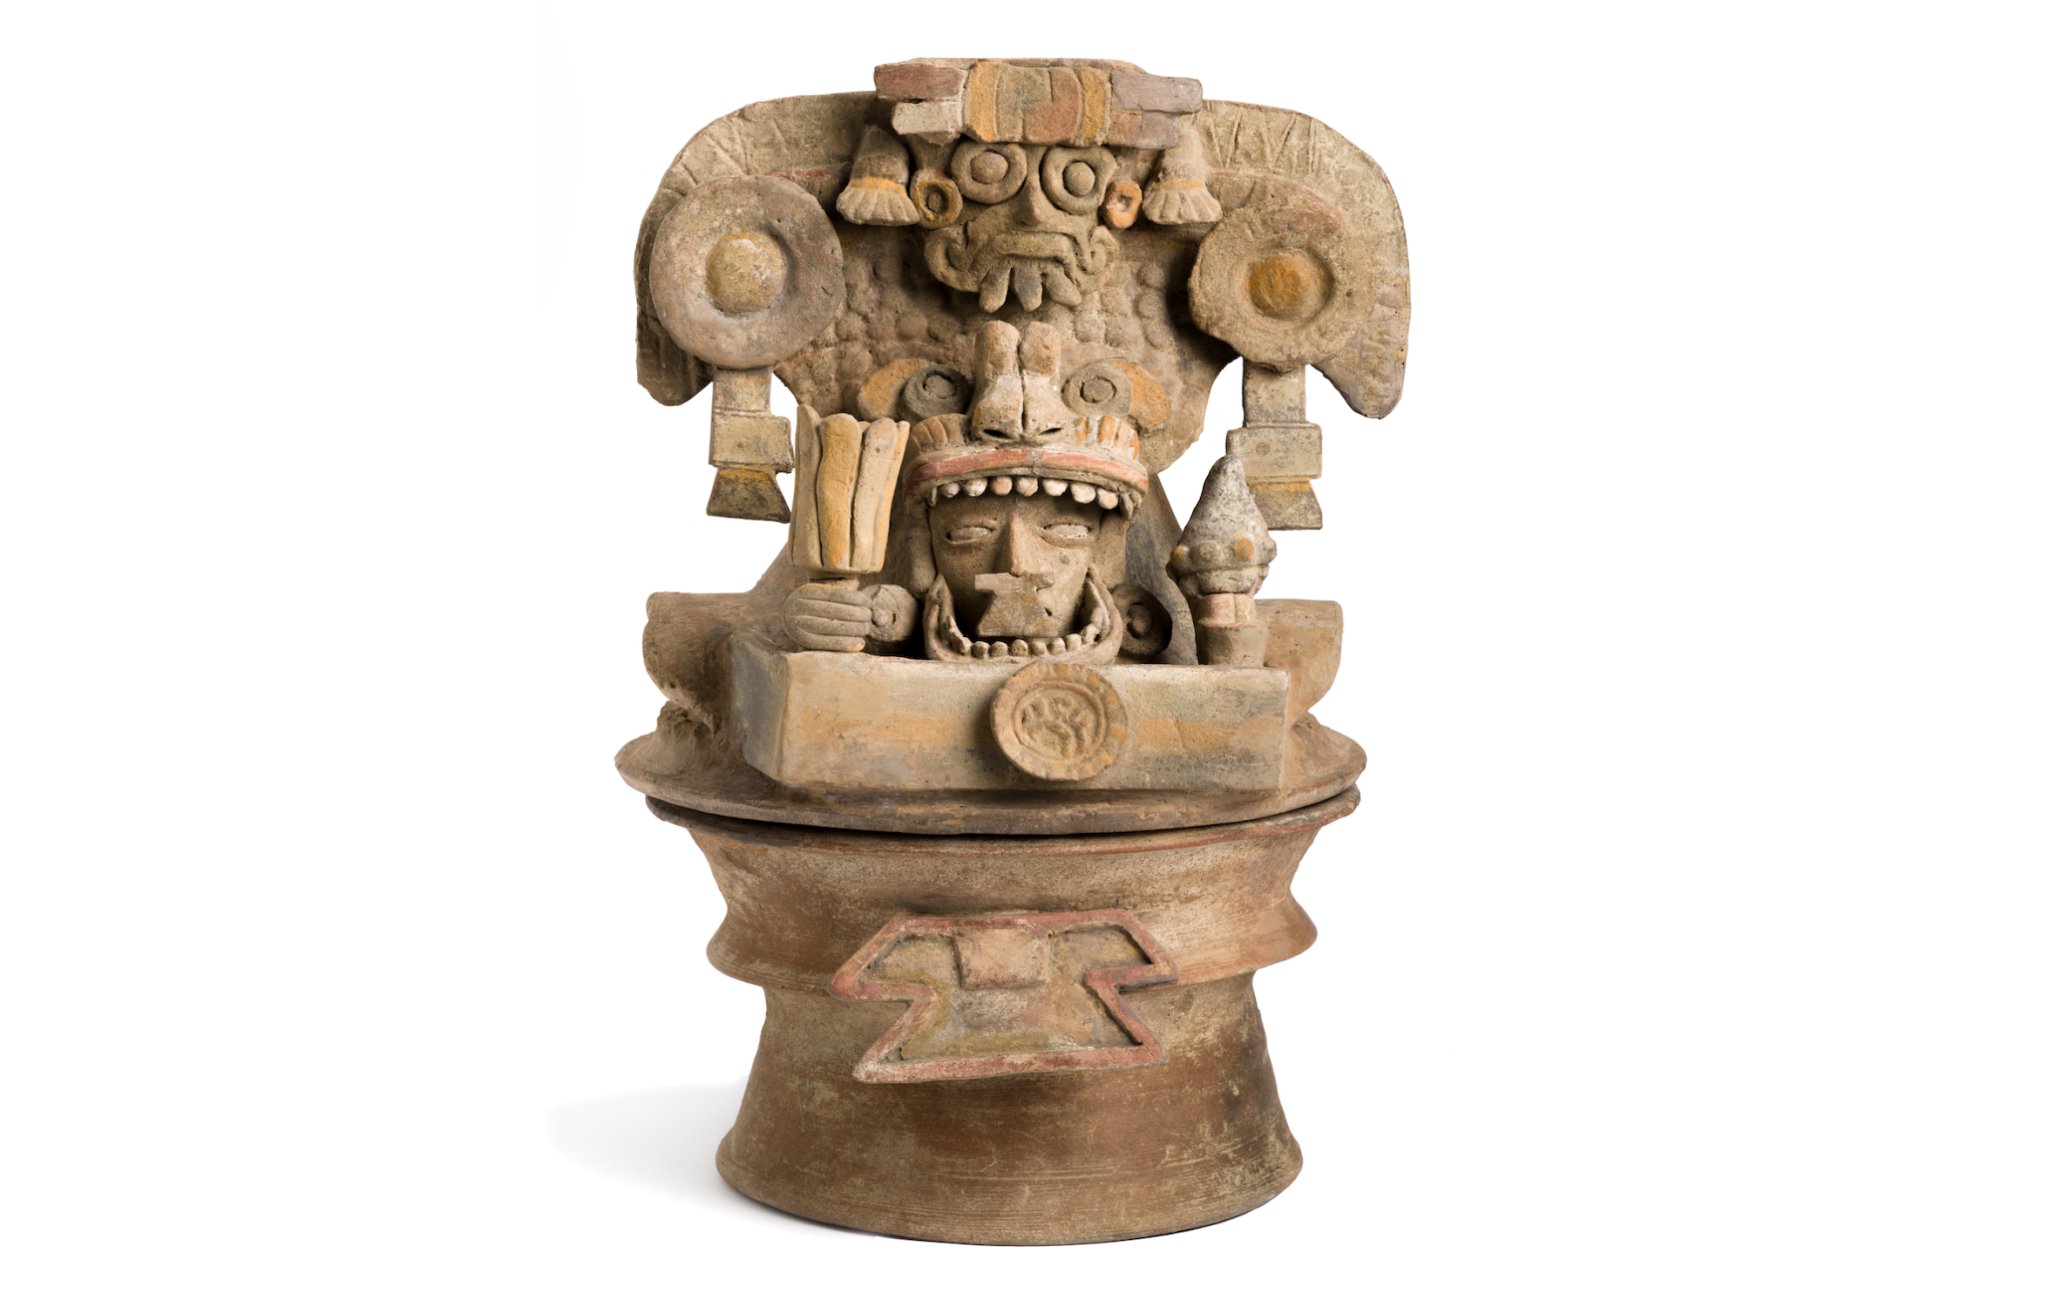 A 300–600 CE sculpture from Maya depicting a person inside a monstrous costume. The head is positioned in the mouth of the beast's costume